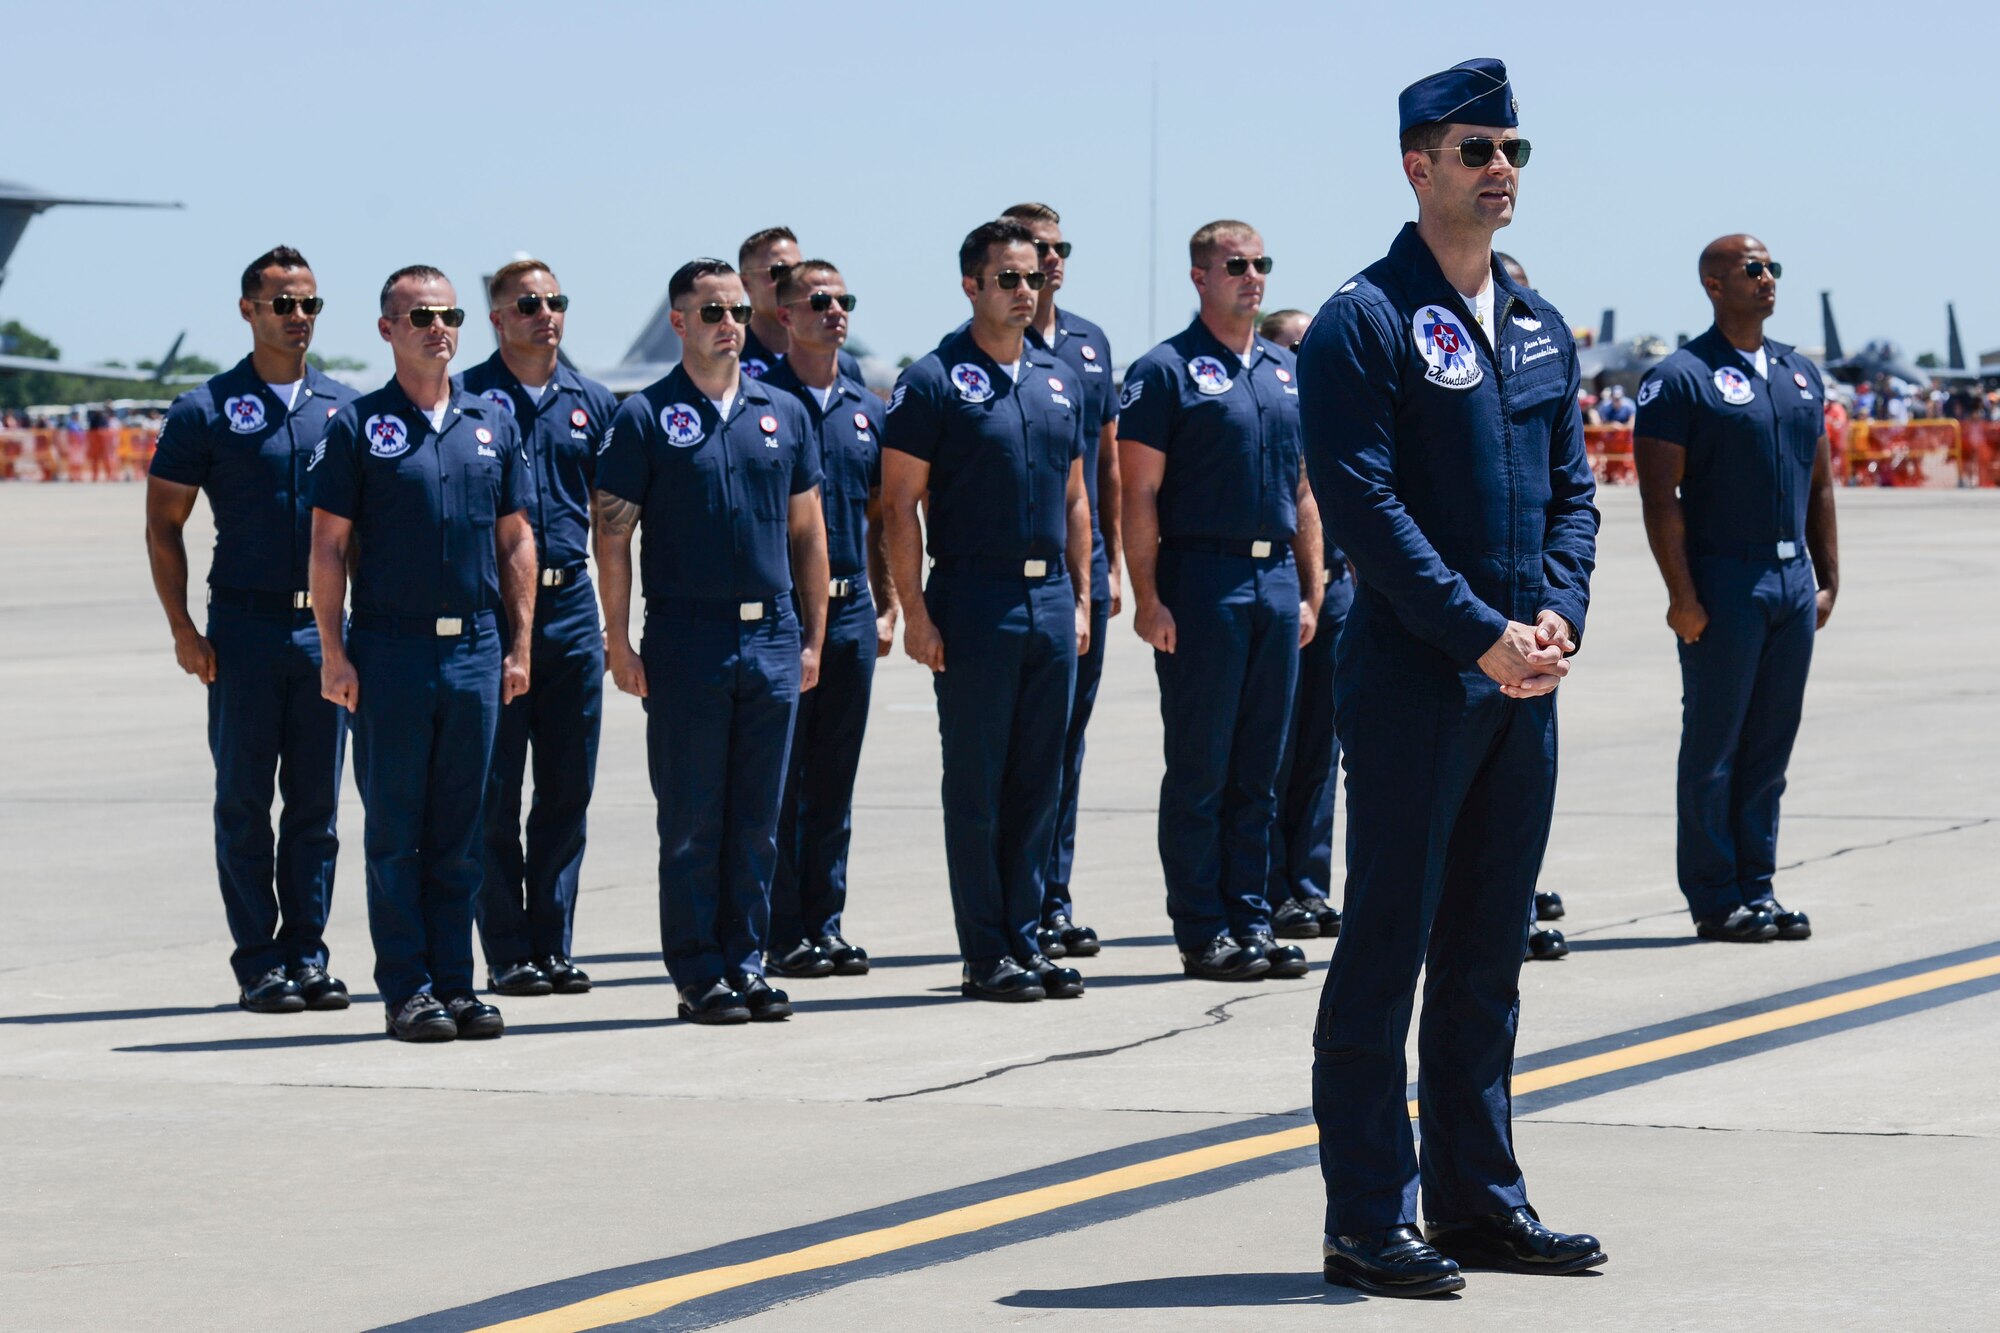 Members of the Thunderbird team prepares for a reenlistment ceremony with Scott Air Force Base personnel during the Scott Air Show, Scott Air Force Base, Ill., June 11, 2017. The base hosted the air show and open house to celebrate the 100th year of Scott AFB.  Over 50 aircraft, ranging from WWI’s Curtiss JN-4 Jenny to the currently utilized KC-135 Stratotanker, came to Scott, the fourth oldest Air Force base. Demonstrations included the Black Daggers, “Tora, Tora, Tora,” and the USAF Thunderbirds. Opened in 1917 and previously named Scott Field, the base has seen its mission evolve and expand to encompass a multitude of priorities, including aeromedical evacuation and communications.  Today, Scott is home to 31 mission partners and provides around-the-clock logistics support and rapid global mobility, carried out primarily by U.S. Transportation Command and Air Mobility Command.